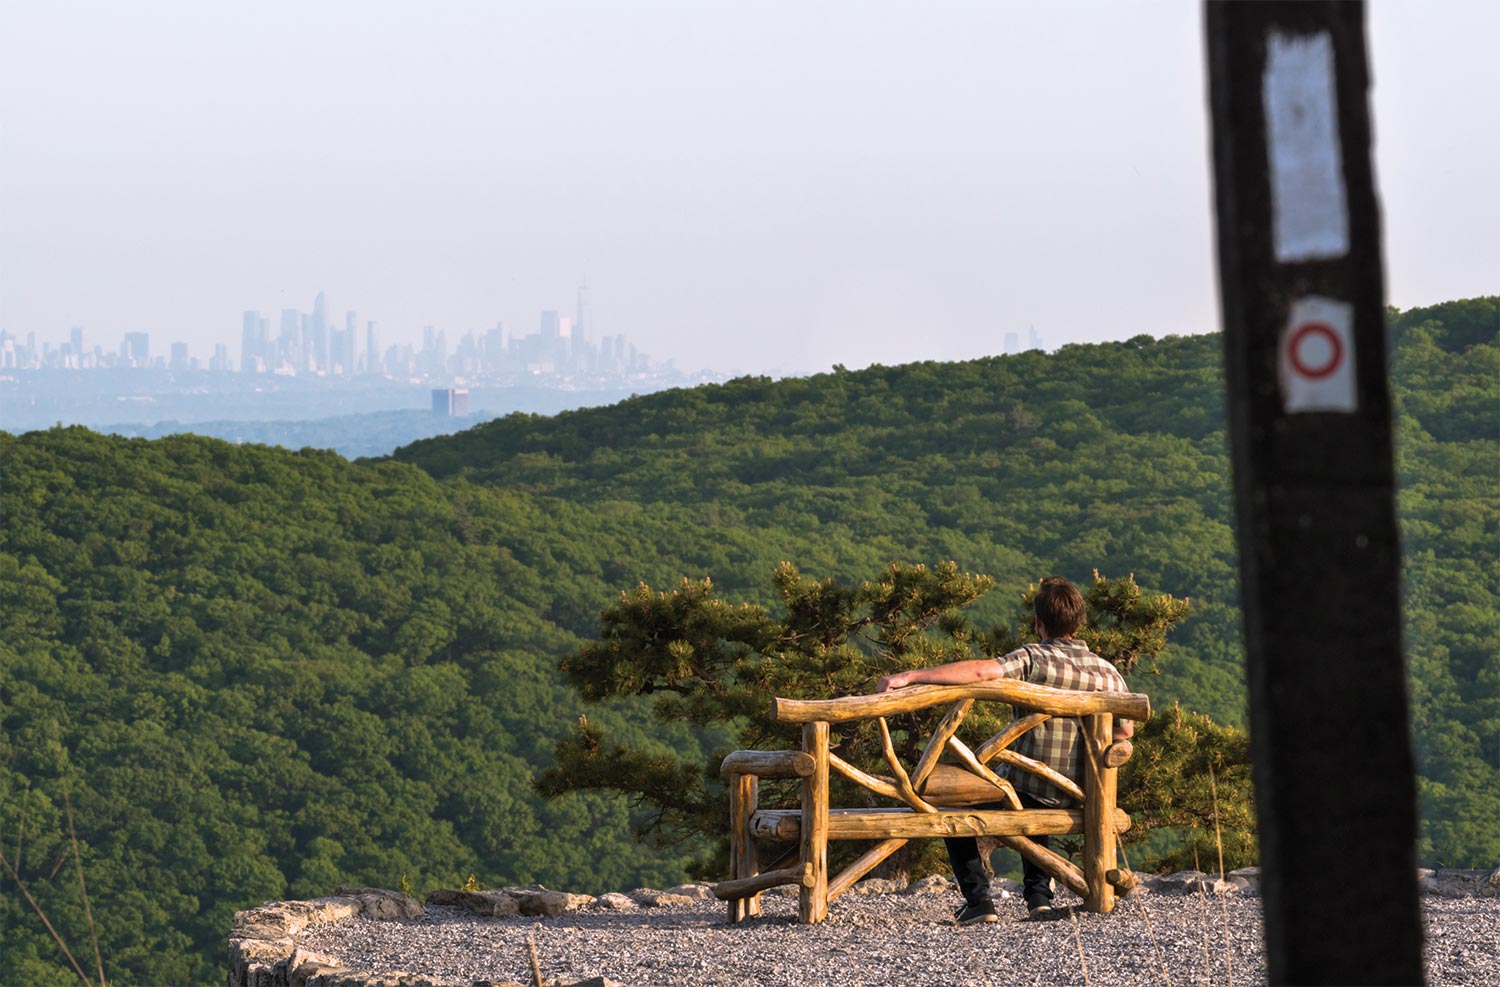 Man enjoying the view from a bench